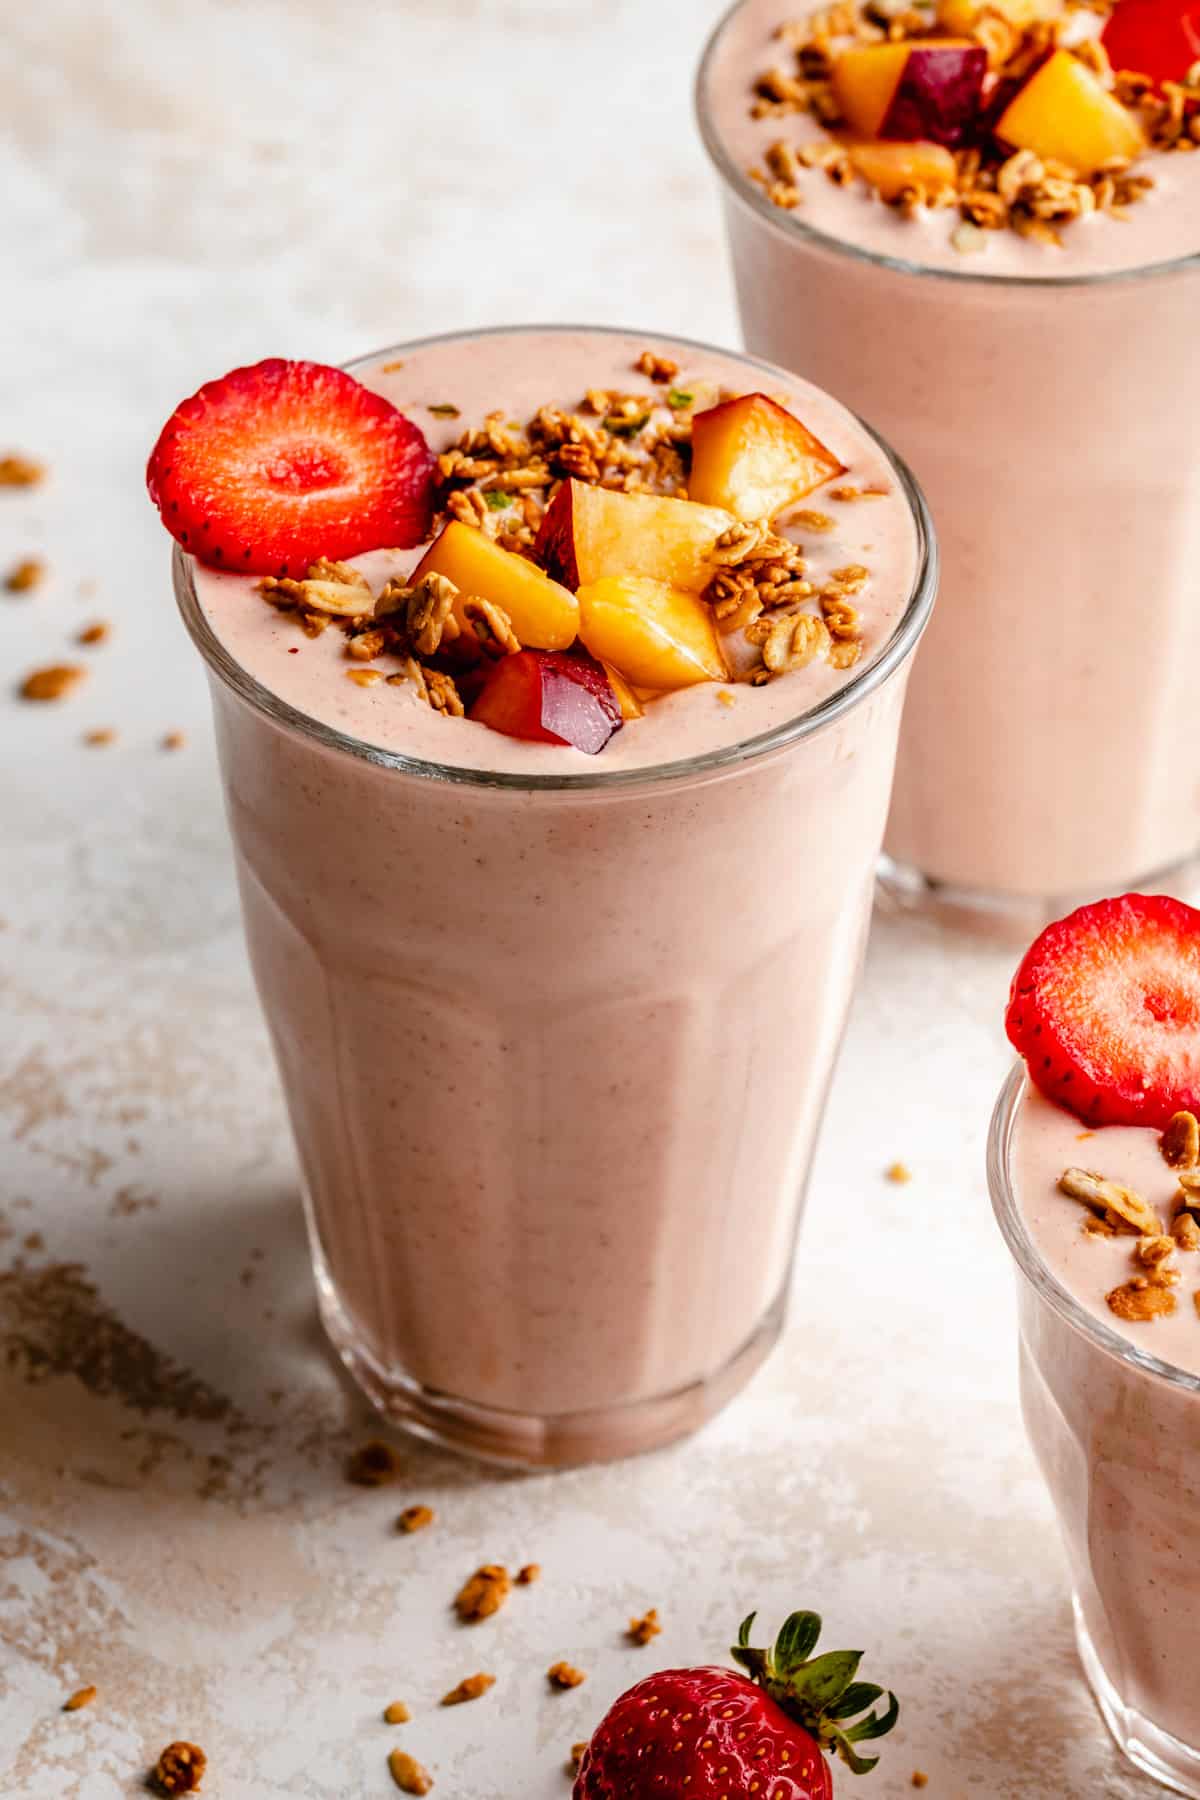 Glasses of strawberry peach smoothie with chopped fruit and granola on top.